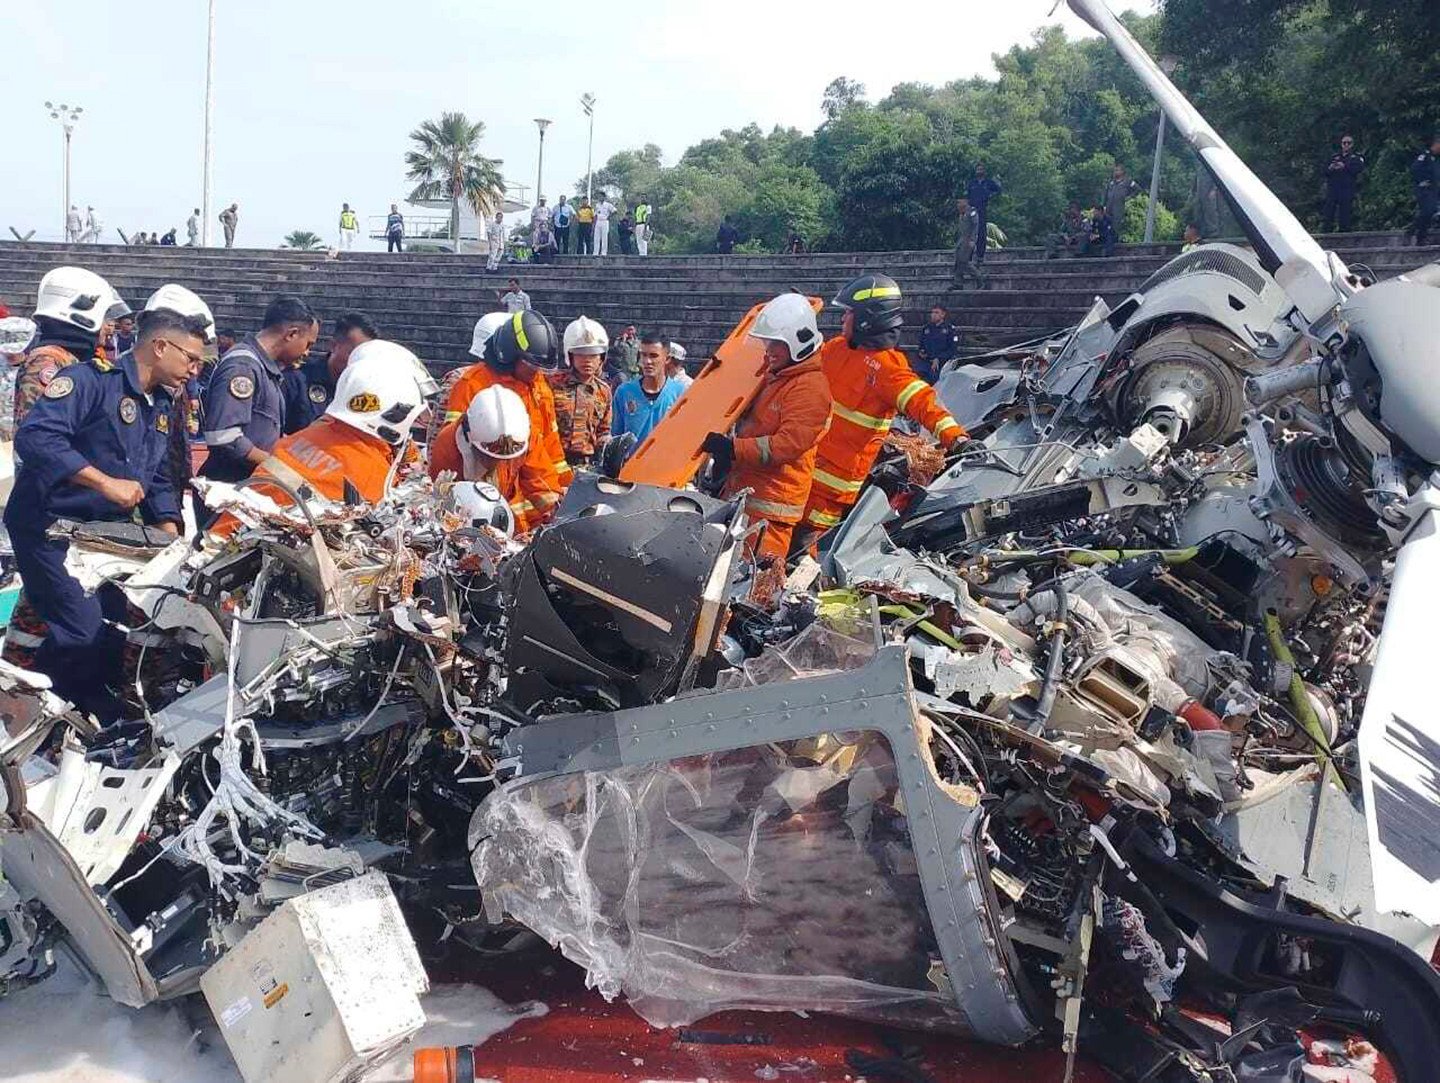 Rescue personnel inspect the crash site of two helicopters in Lumur, Perak, on April 23. Photo: Fire & Rescue Department of Malaysia via AP